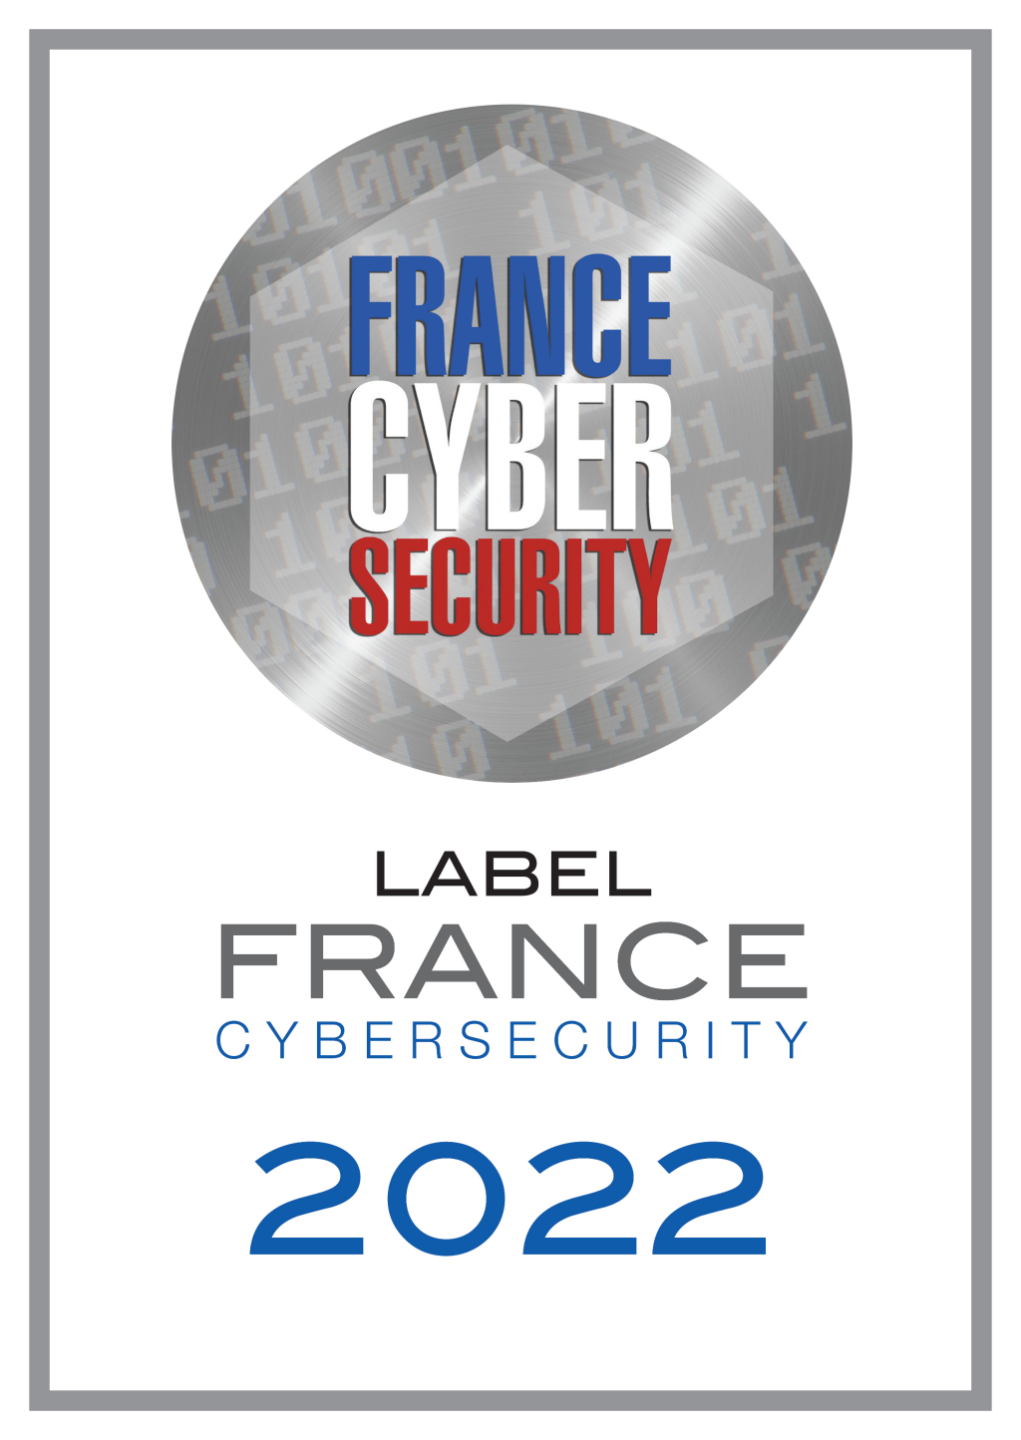 France Cyber Security 2022